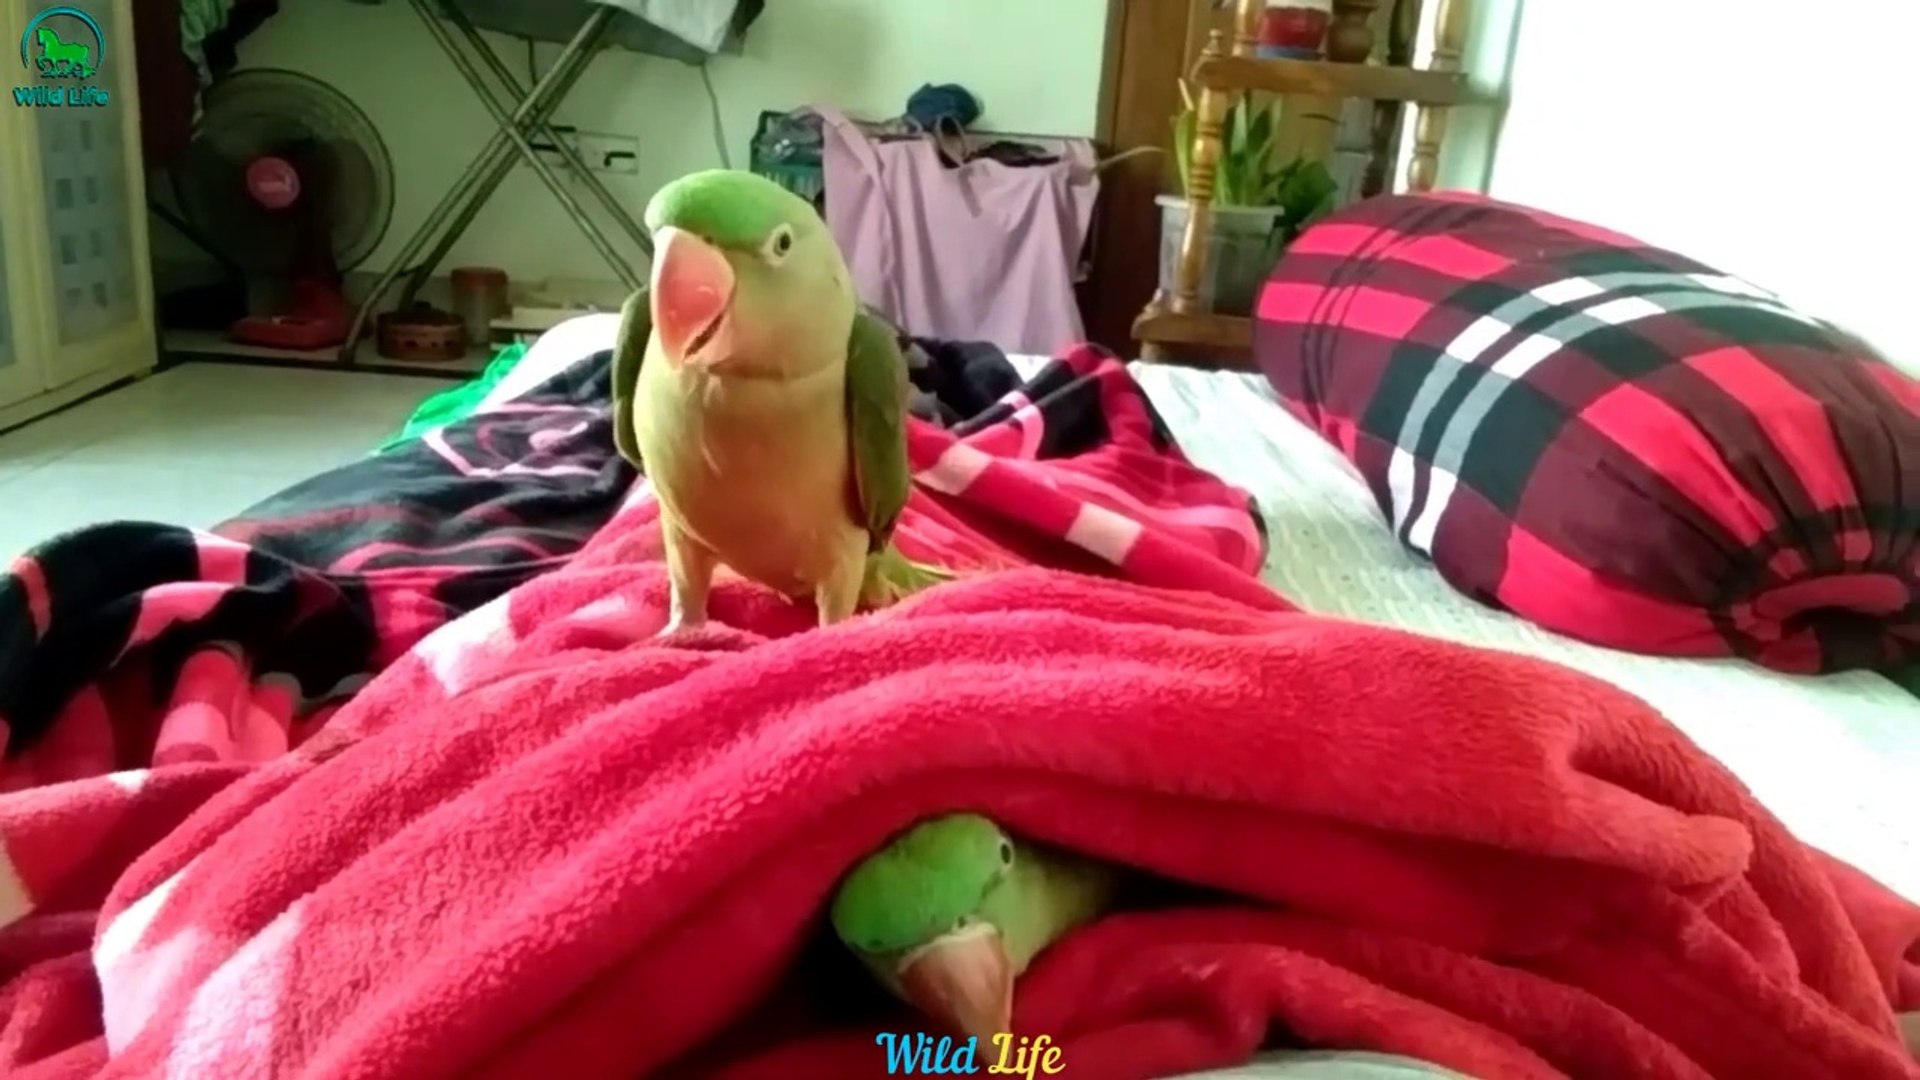 Alexandrine parakeets(Ringneck Parrot) doing humorous thing - Funny PARROTS Videos